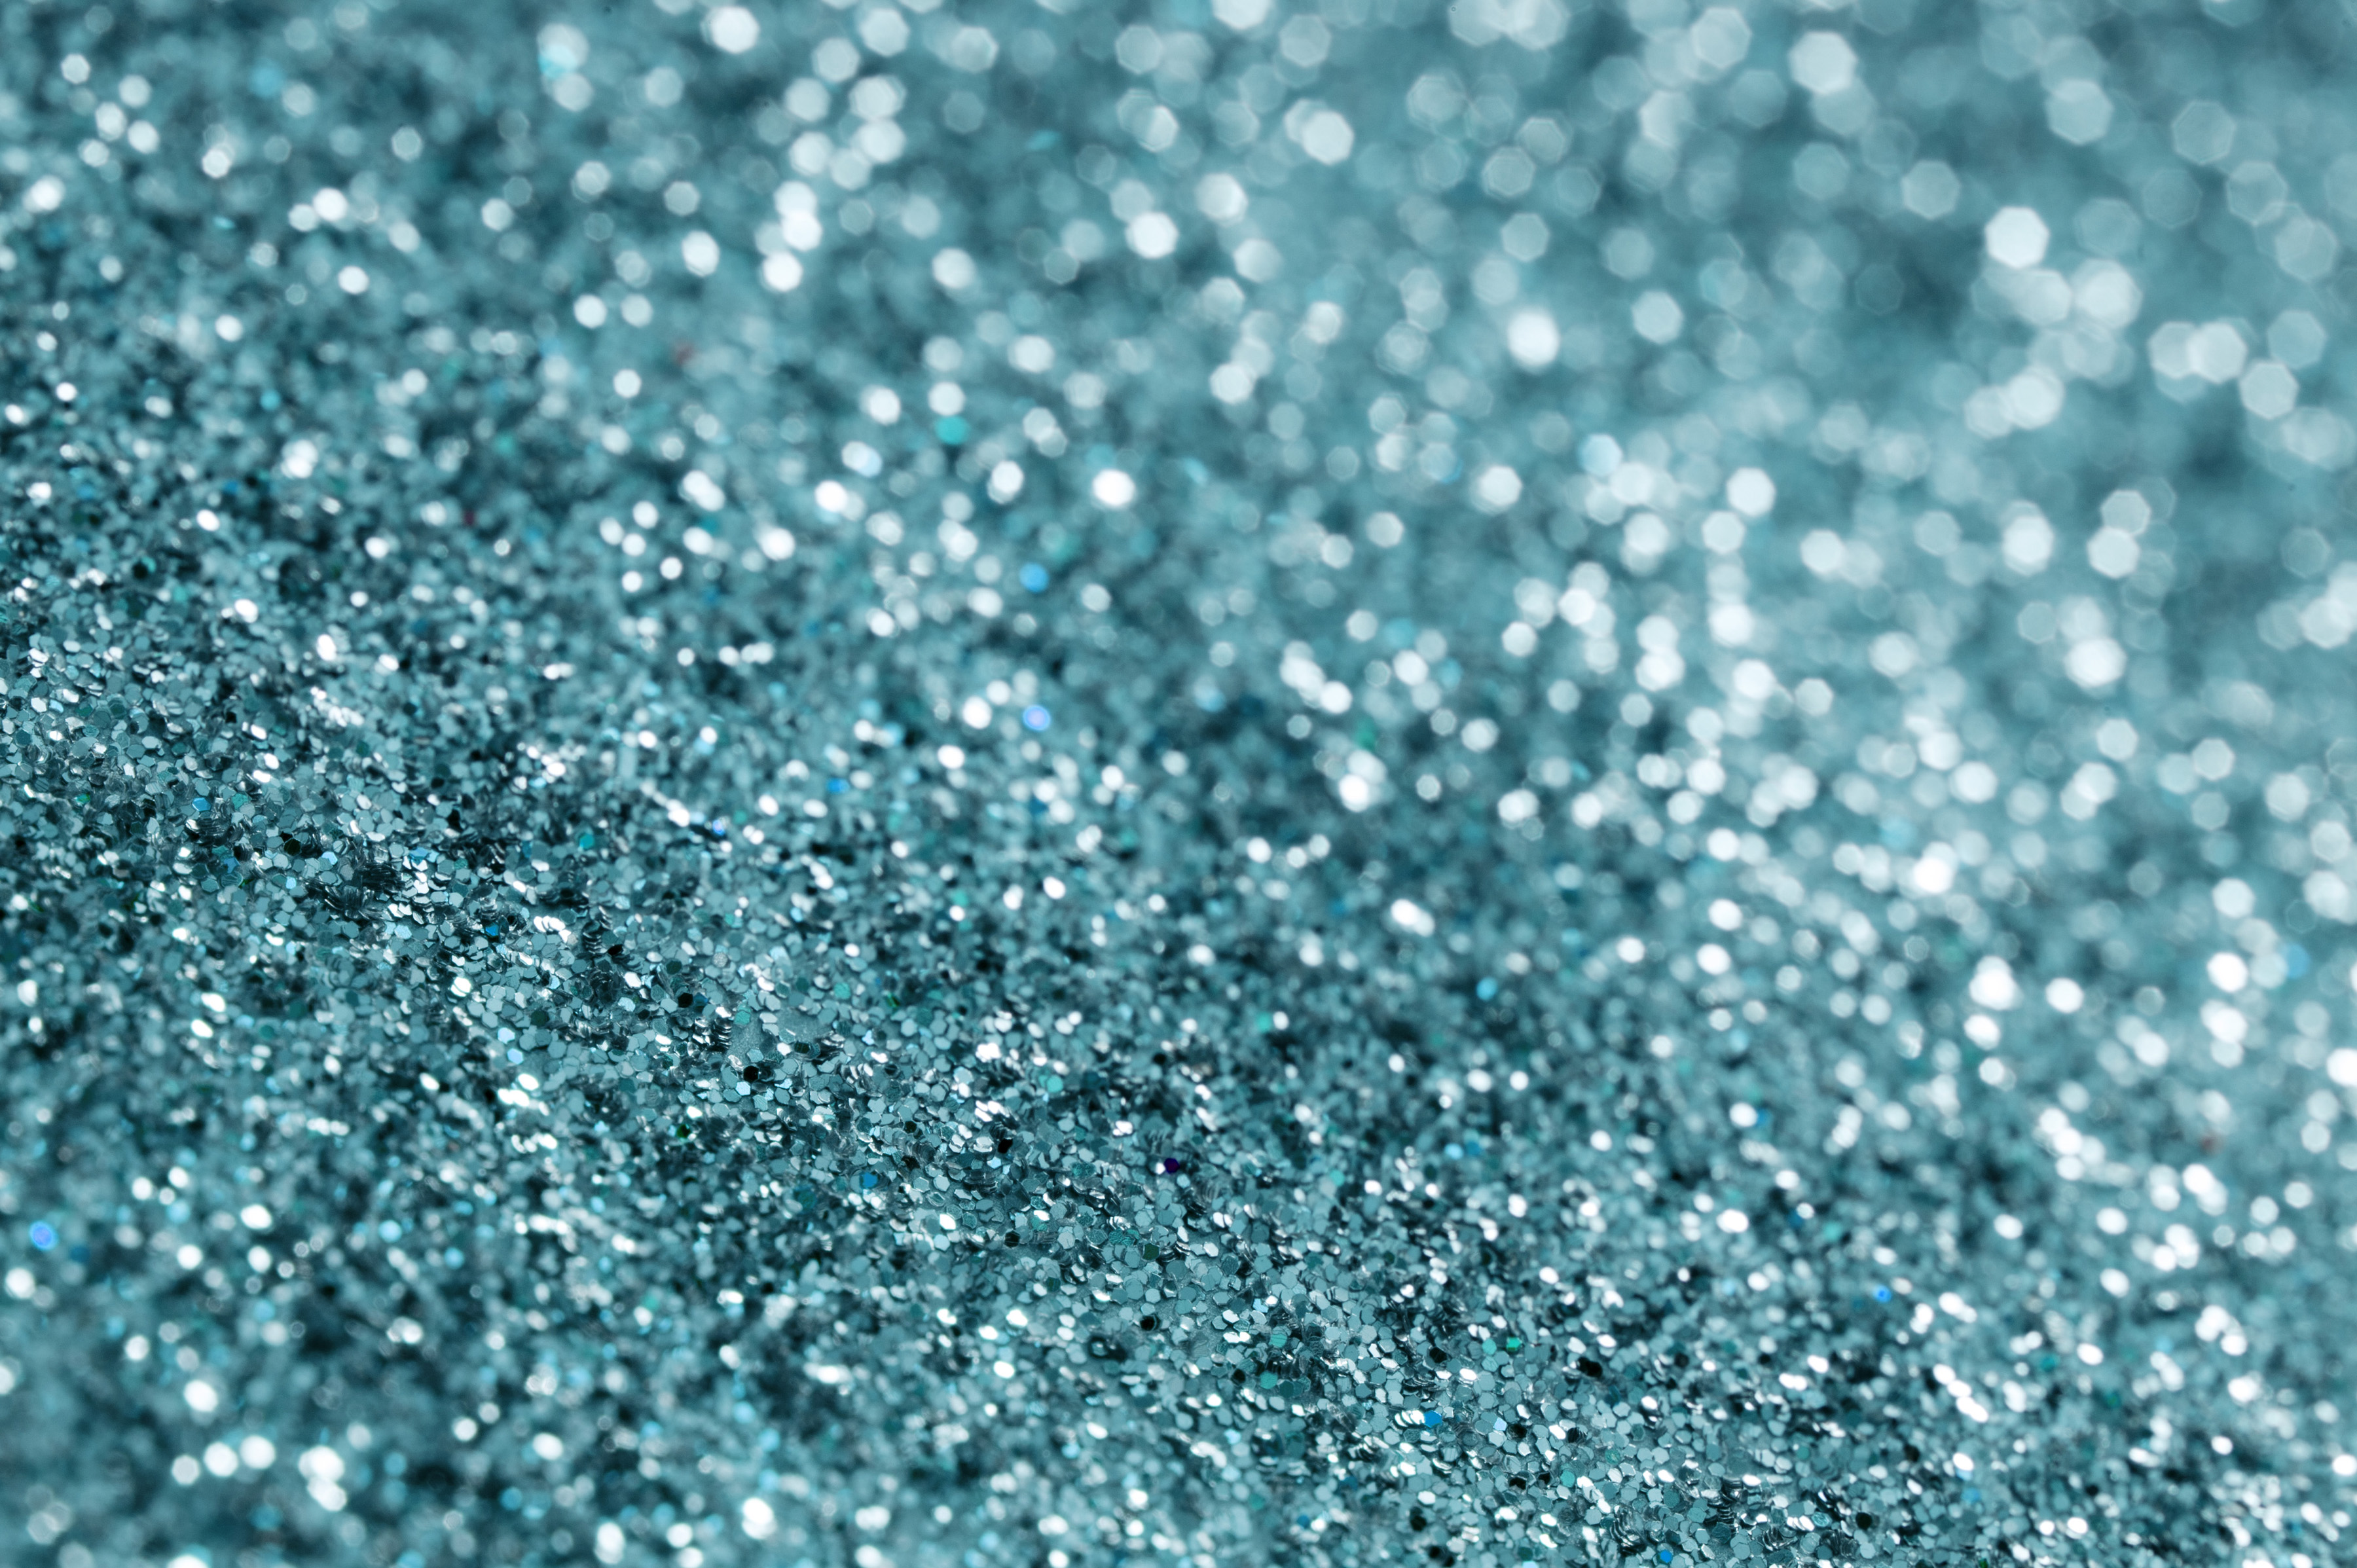 View Full Image Terms Of Use. blue glitter sparkling surface teal backgroun...